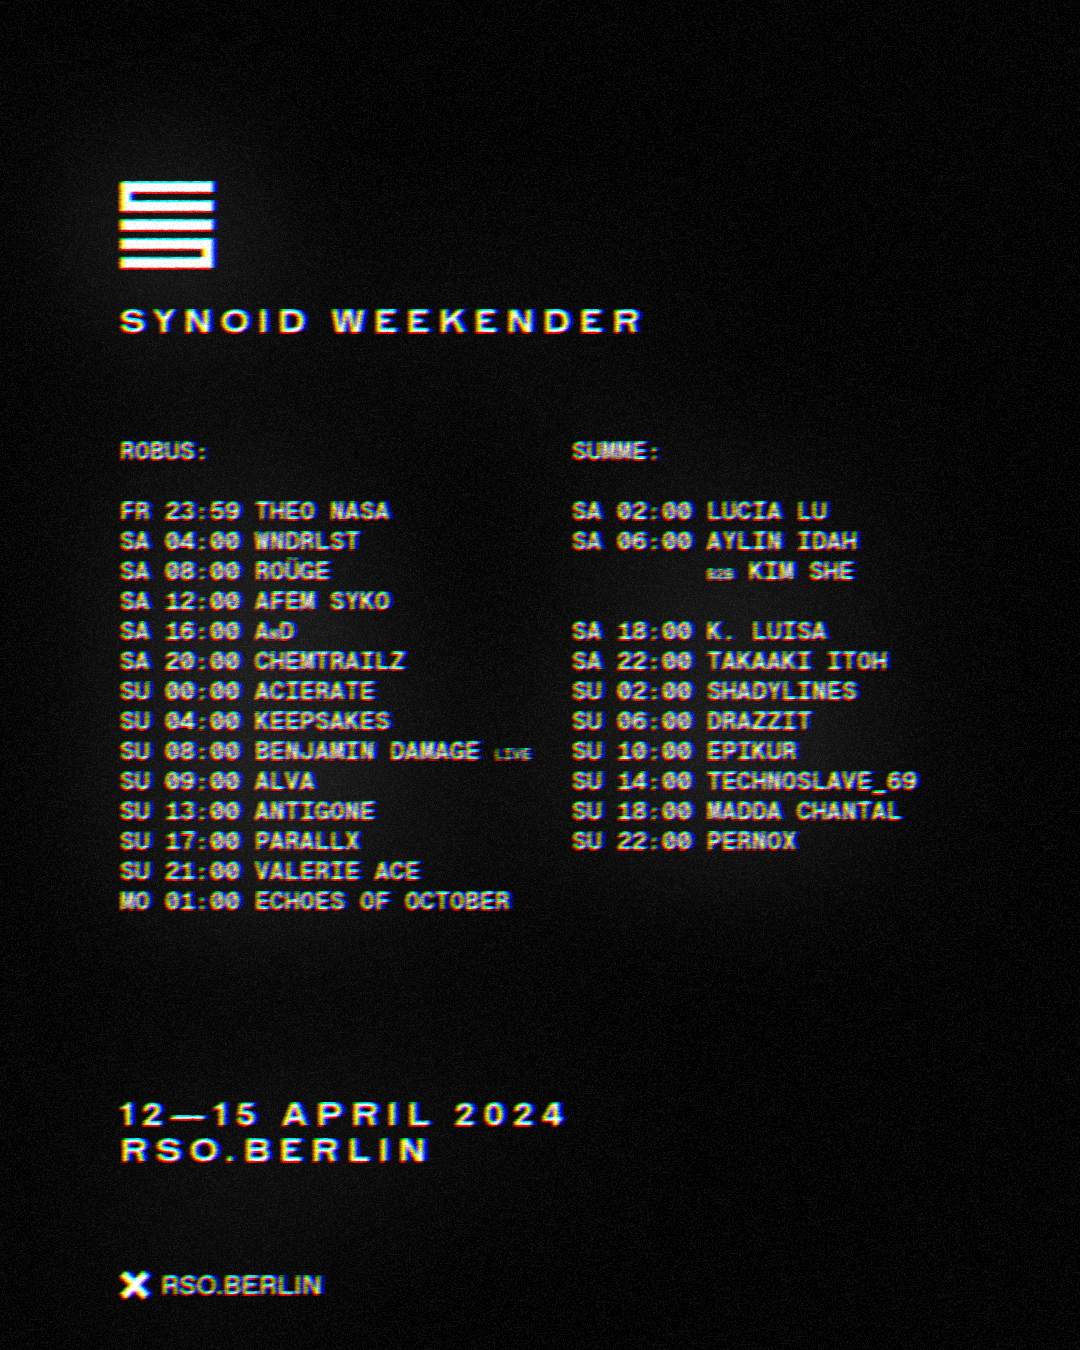 SYNOID Weekender - フライヤー裏